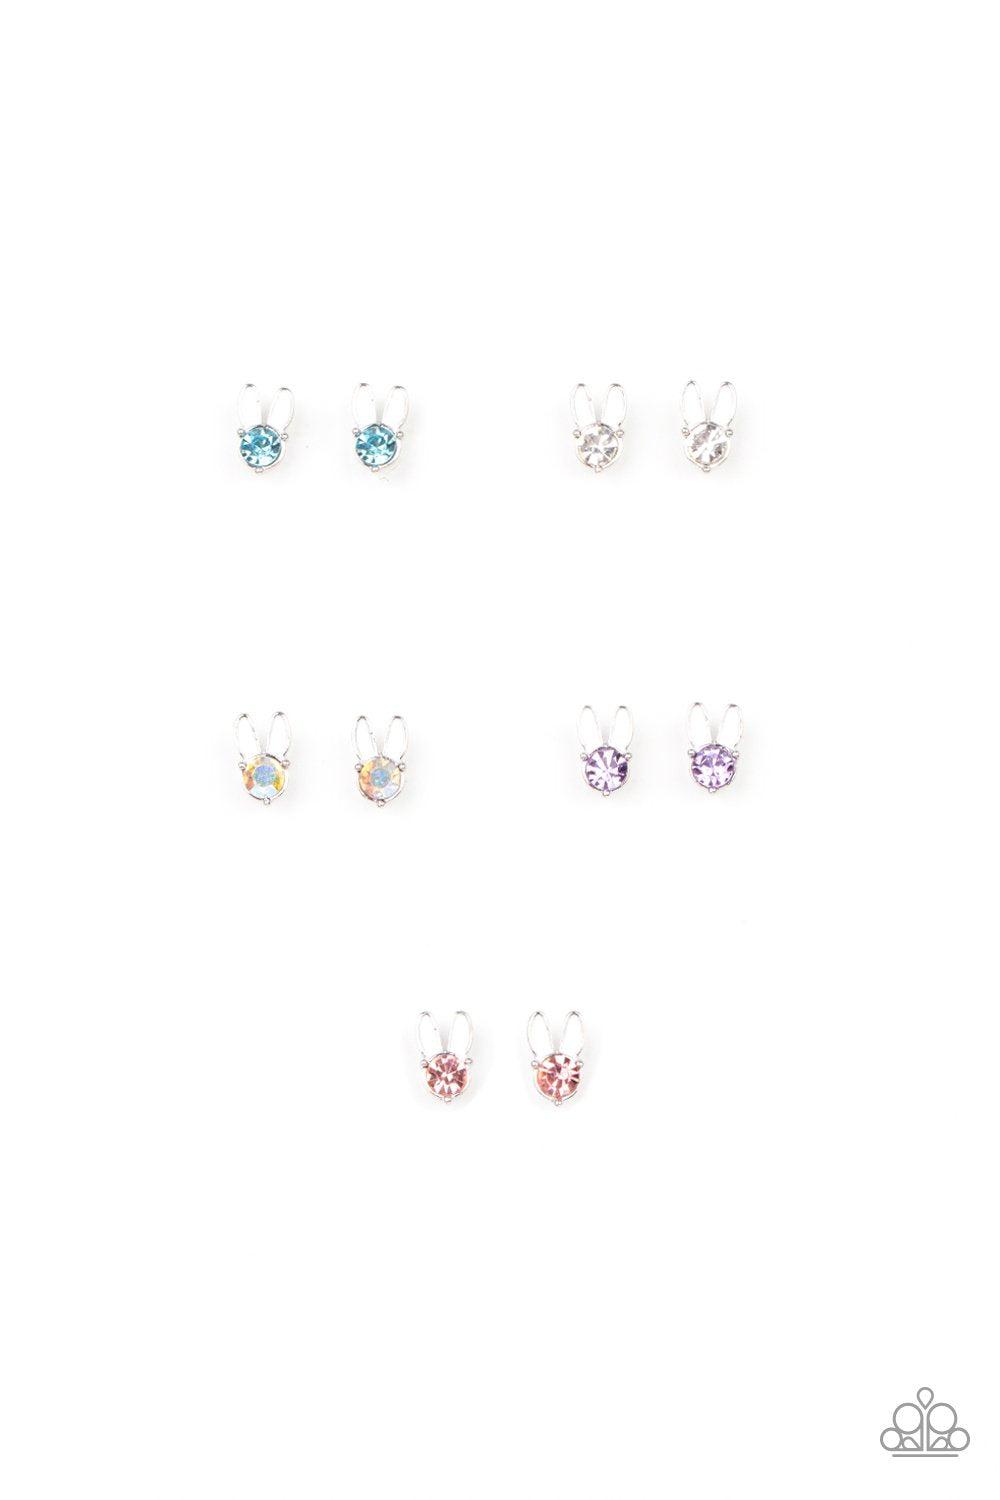 Starlet Shimmer Children&#39;s Easter Bunny Rhinestone Post Earrings - Paparazzi Accessories (set of 5 pairs) - Full set -CarasShop.com - $5 Jewelry by Cara Jewels